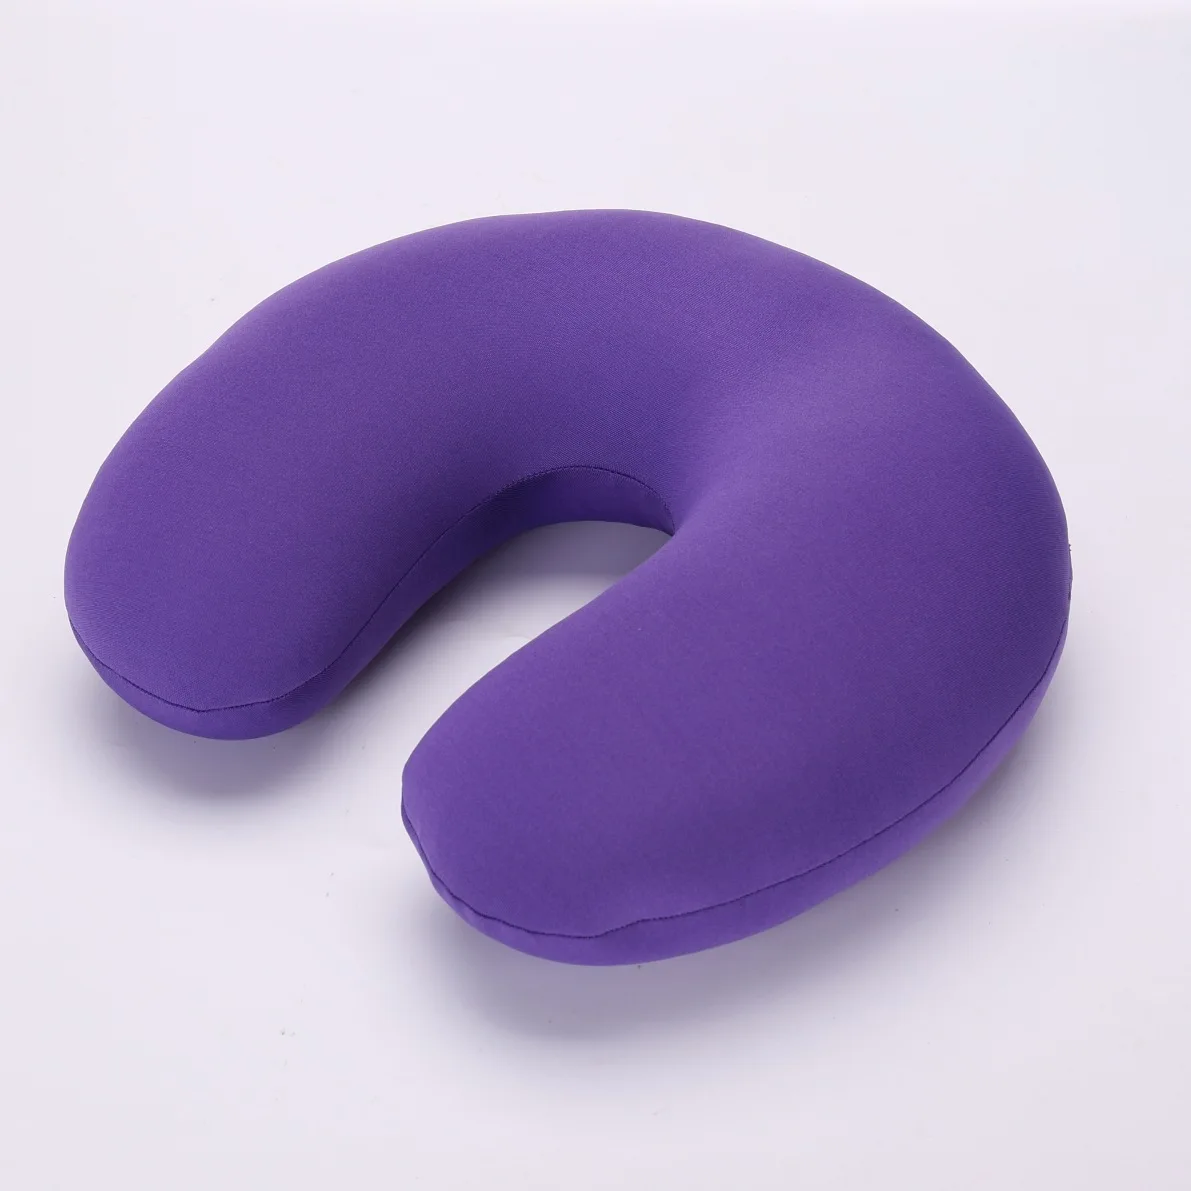 https://ae01.alicdn.com/kf/S1f4dc4884a914361b3b68f75f0a898d0U/U-Shaped-Comfort-Microbead-Home-Travel-Car-Neck-Pillow-Cushion-Sleep-Support-Pain-Relief-Soft.jpg